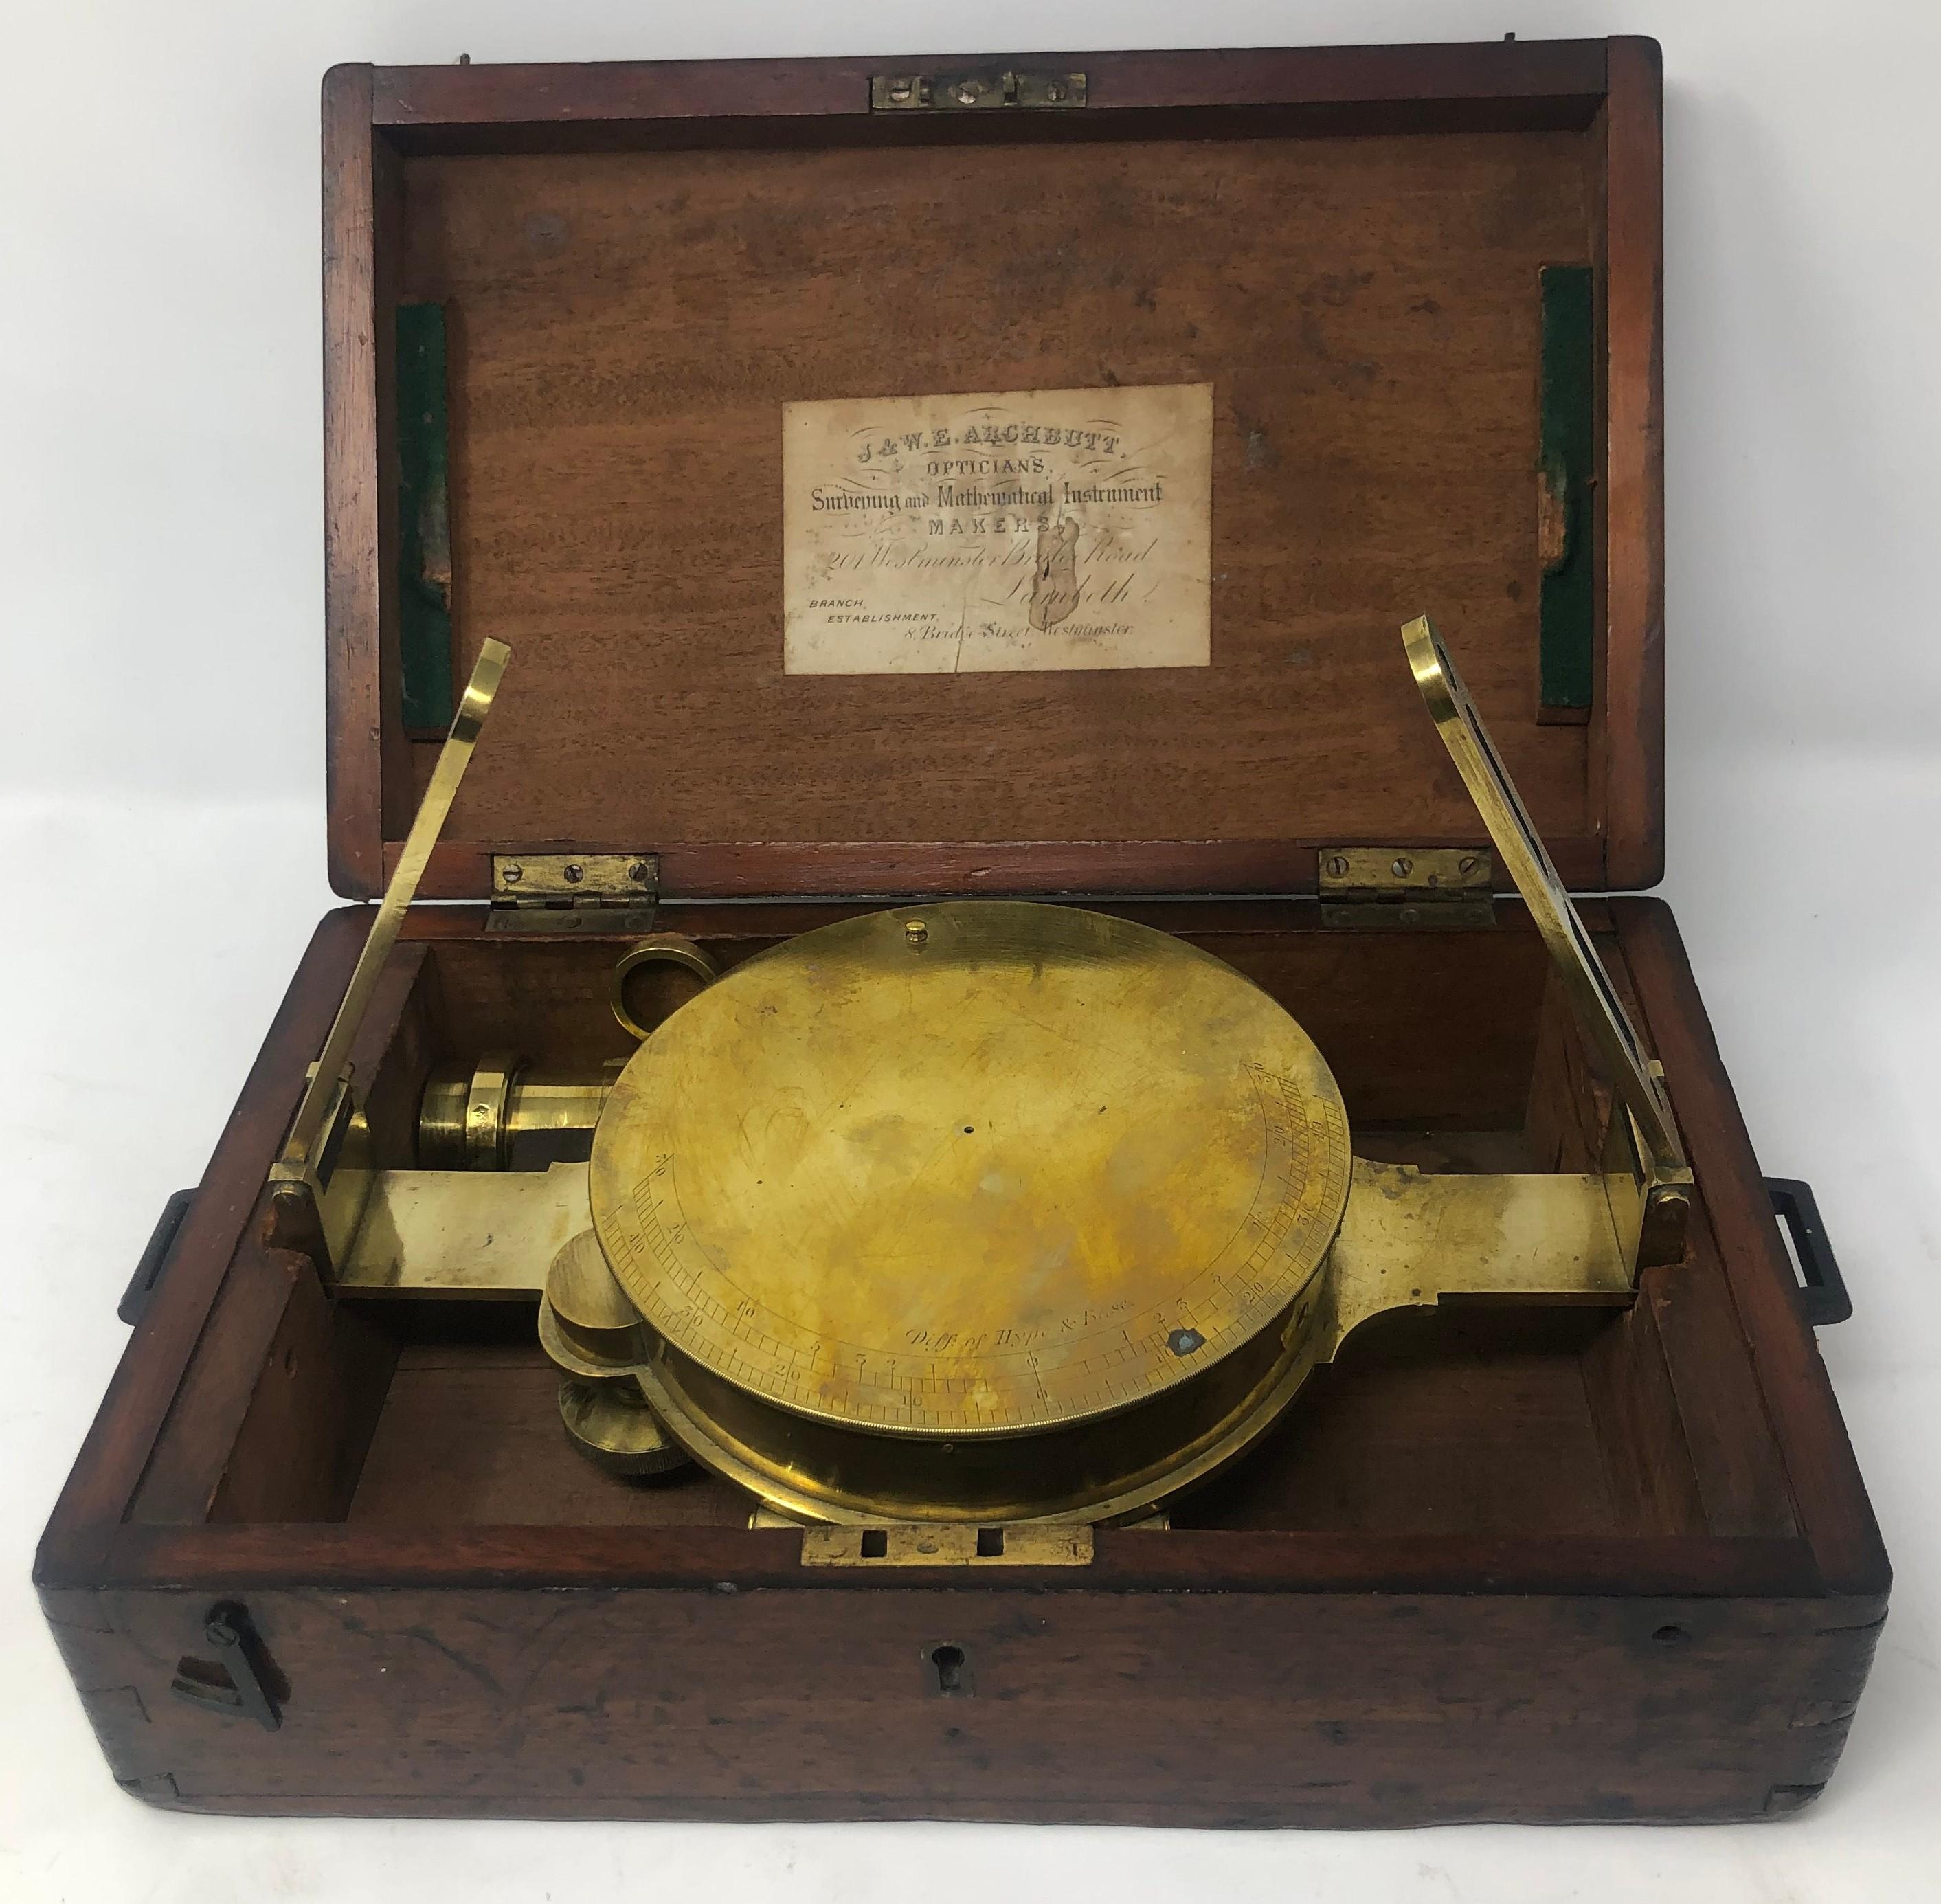 Antique English Lond-made brass surveying compass in original case, circa 1880.
Made By J. and W.E. Archbutt of London. Manufacturers of scientific measuring instruments, such as levels and theodolites etc, of 201 Westminster Bridge Road, Lambeth,